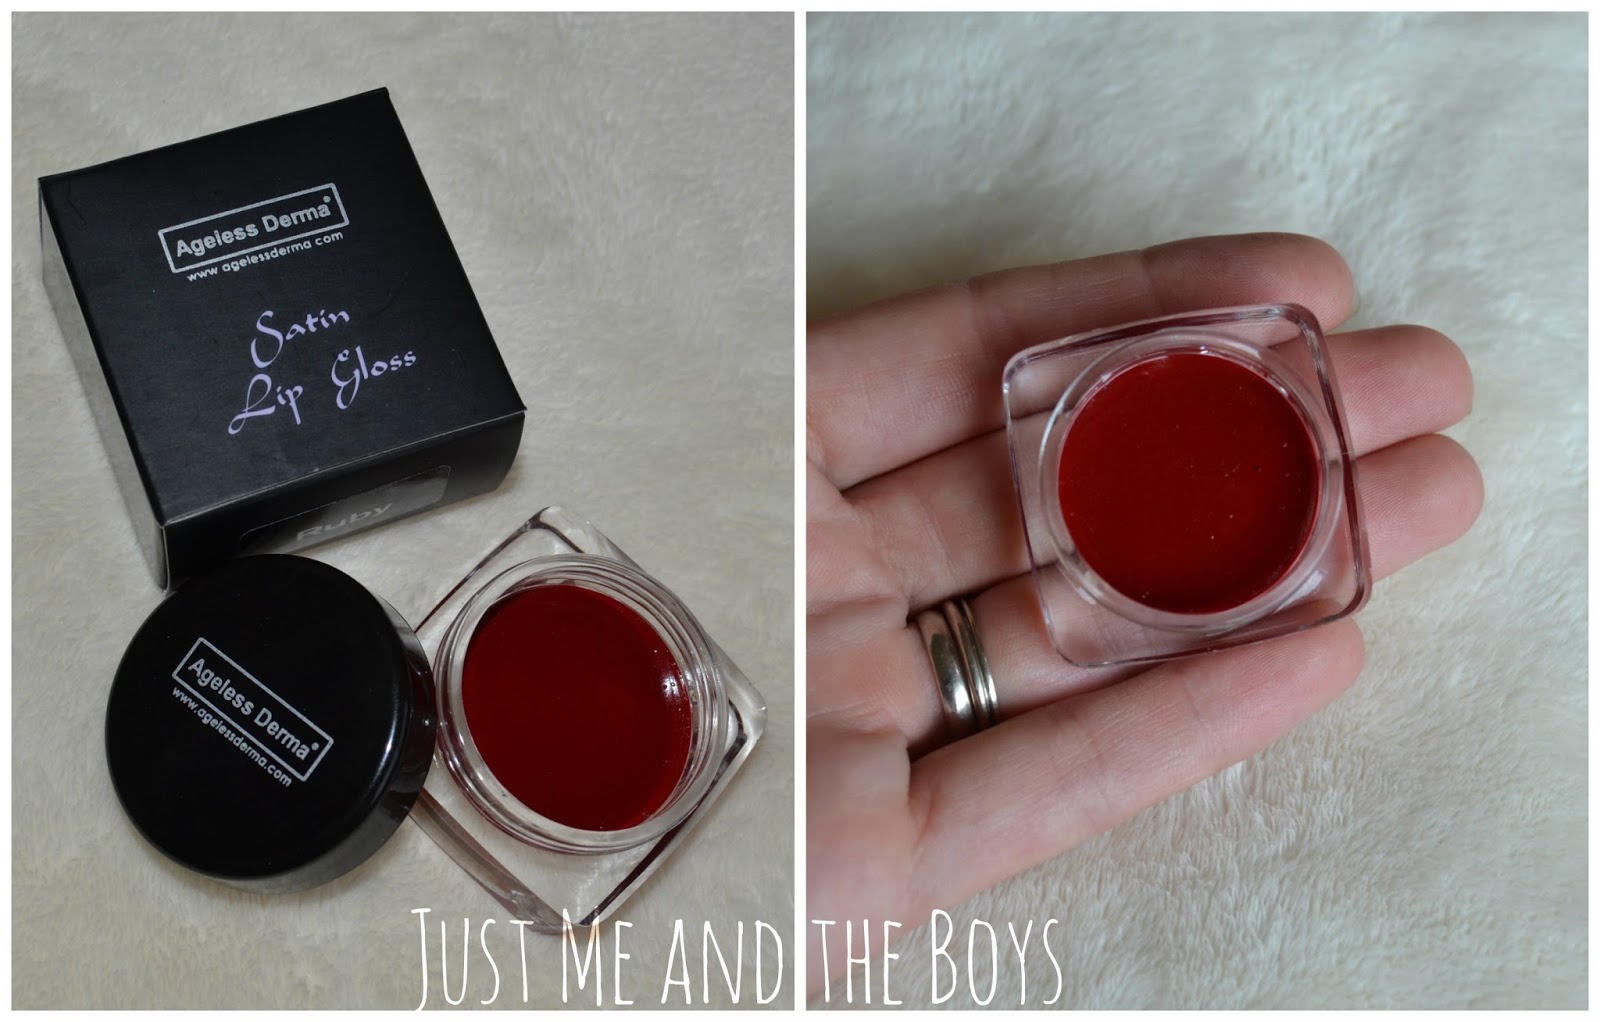 Just Me and the Boys: Ageless Derma ~ Lip Gloss Review